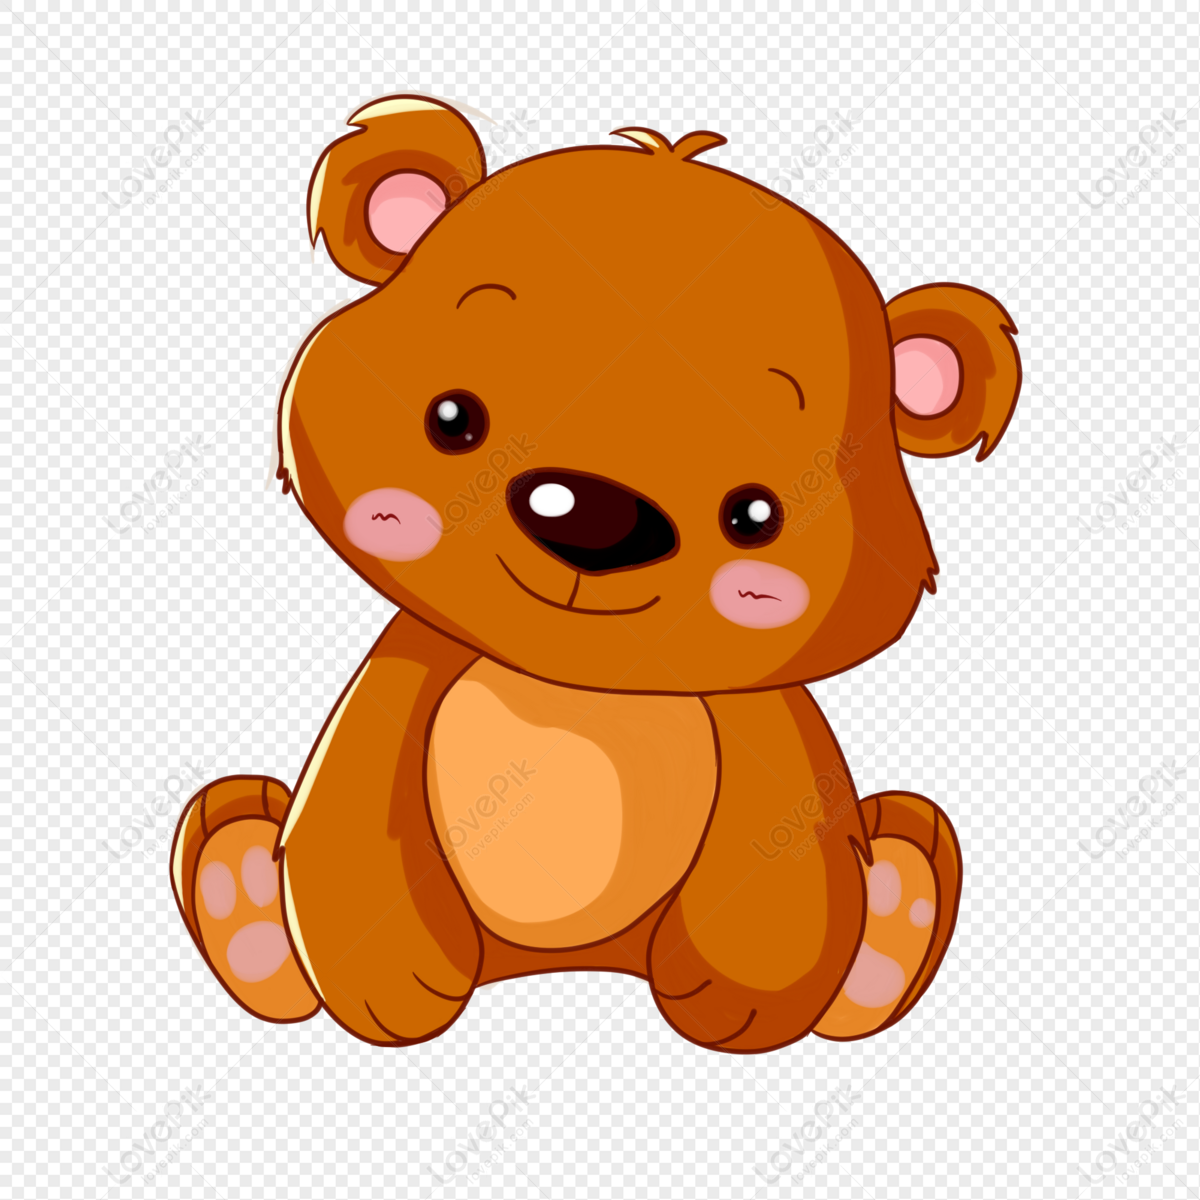 Autumn Bear PNG Transparent Background And Clipart Image For Free Download  - Lovepik | 401528400